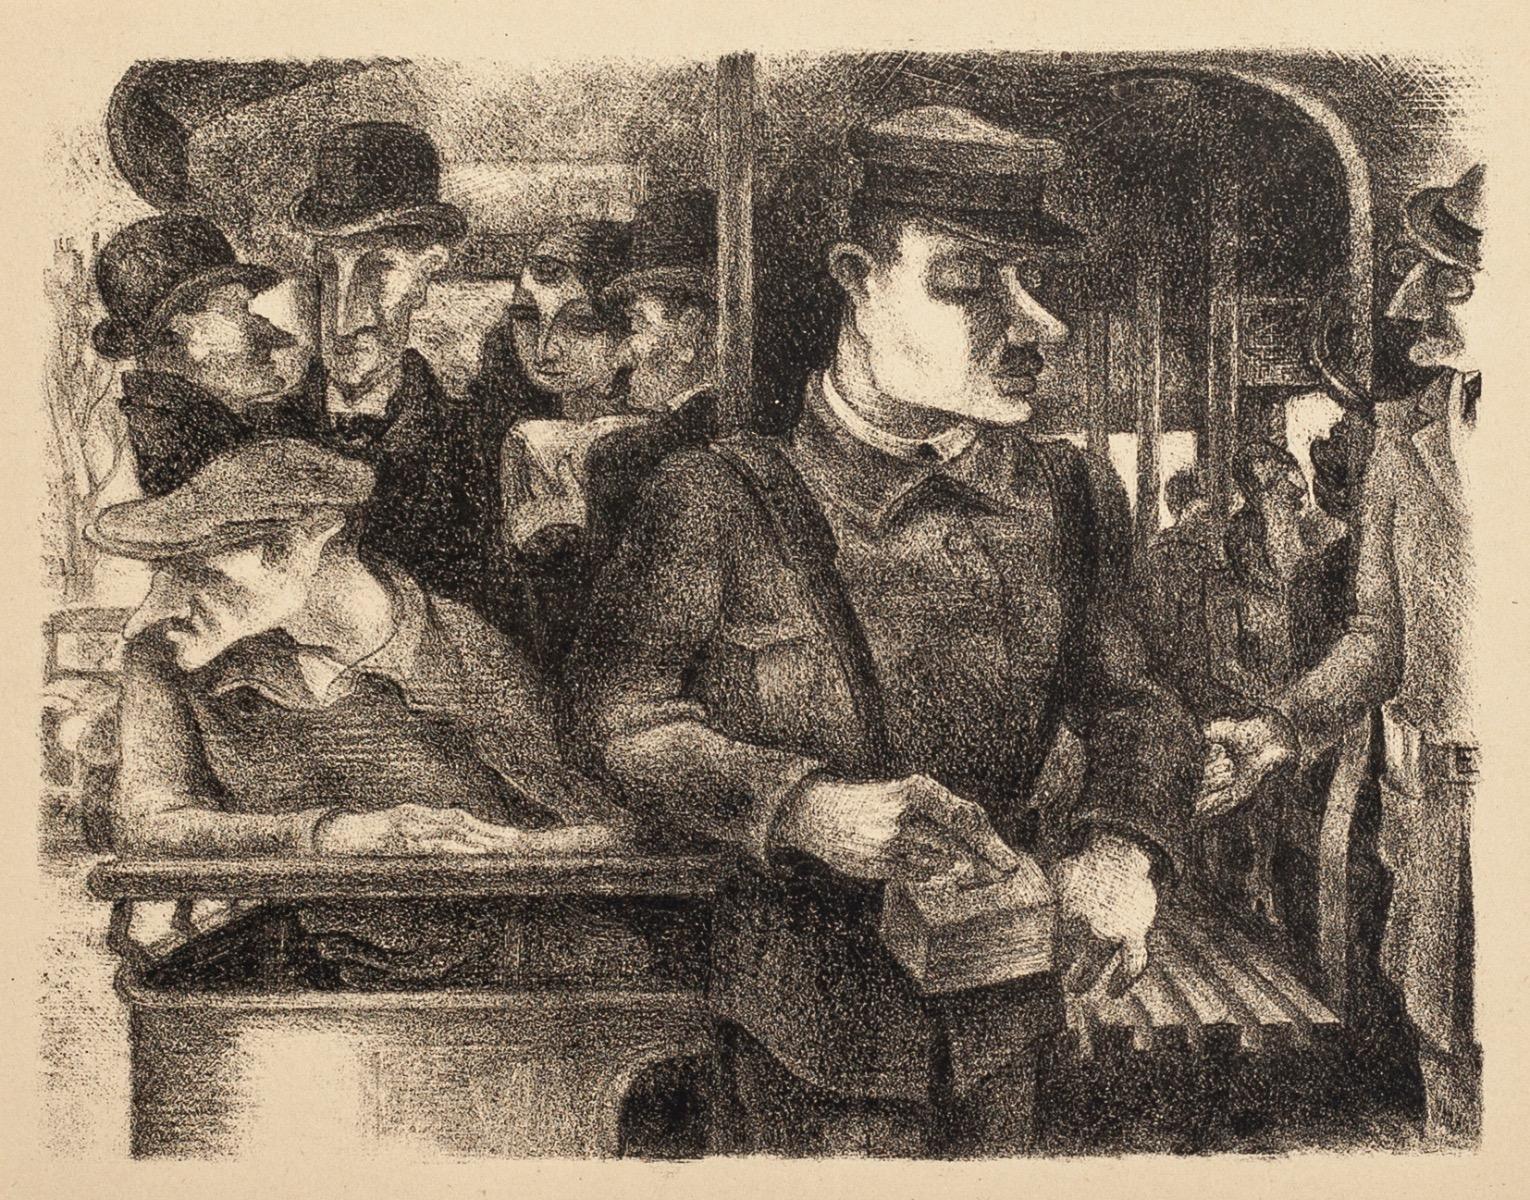 Unknown Figurative Print - Passengers - Original Litograph by German Expressionist - 1930s